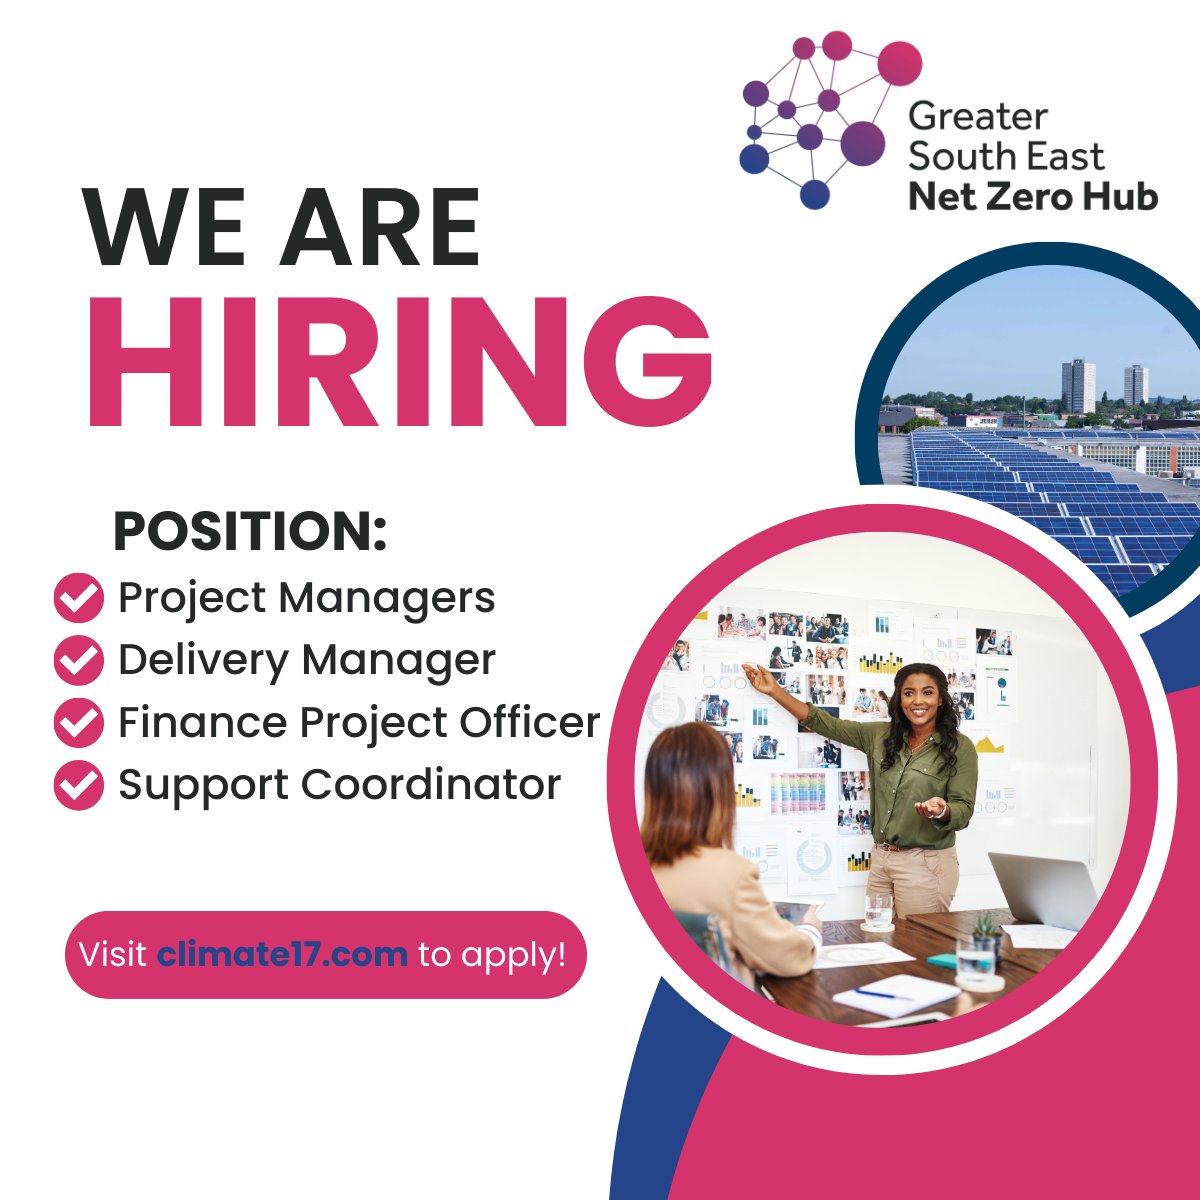 We are recruiting for a Support Coordinator, could that be you? The candidate will provide senior administrative support as part of the Local Net Zero Accelerator Programme. Find out more: climate17.com/job/support-co… #JobAlert #Recruiting #Hiring #NetZero